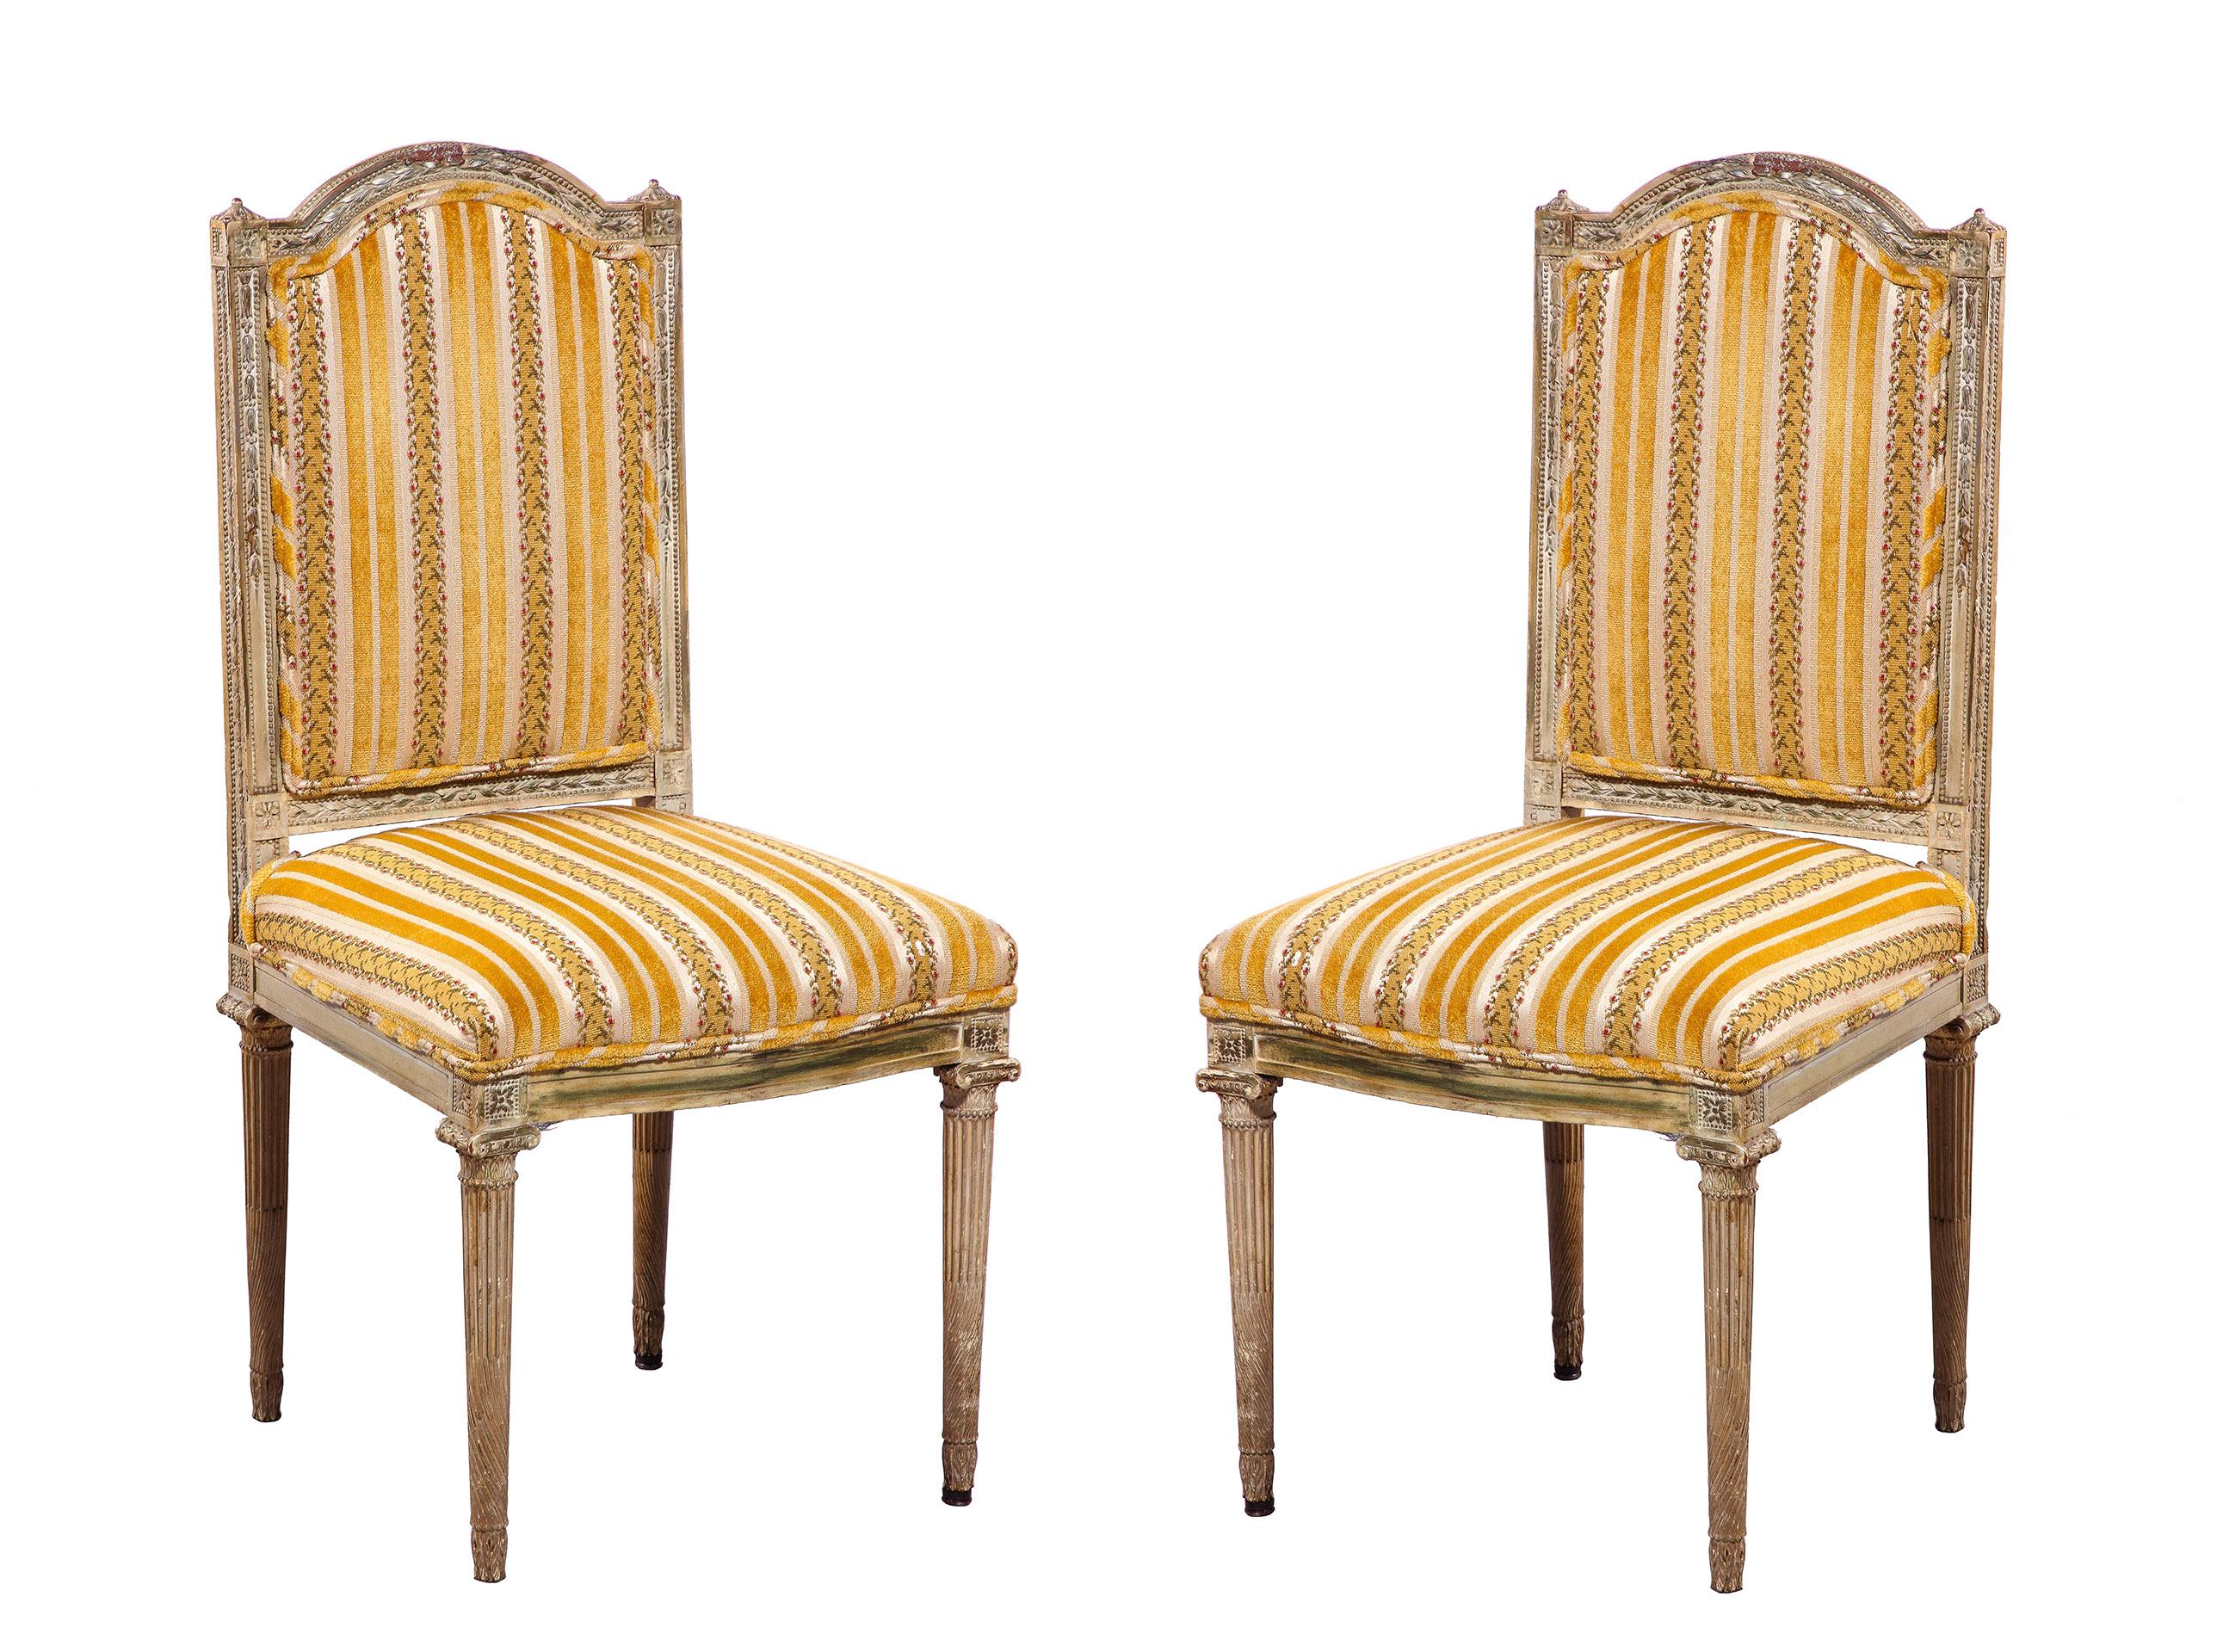 The fine pair of Louis XVI side chairs with an intricately carved frame surrounding an upholstered back and seat with fluted legs, the whole having original paint in a lovely faded patina.